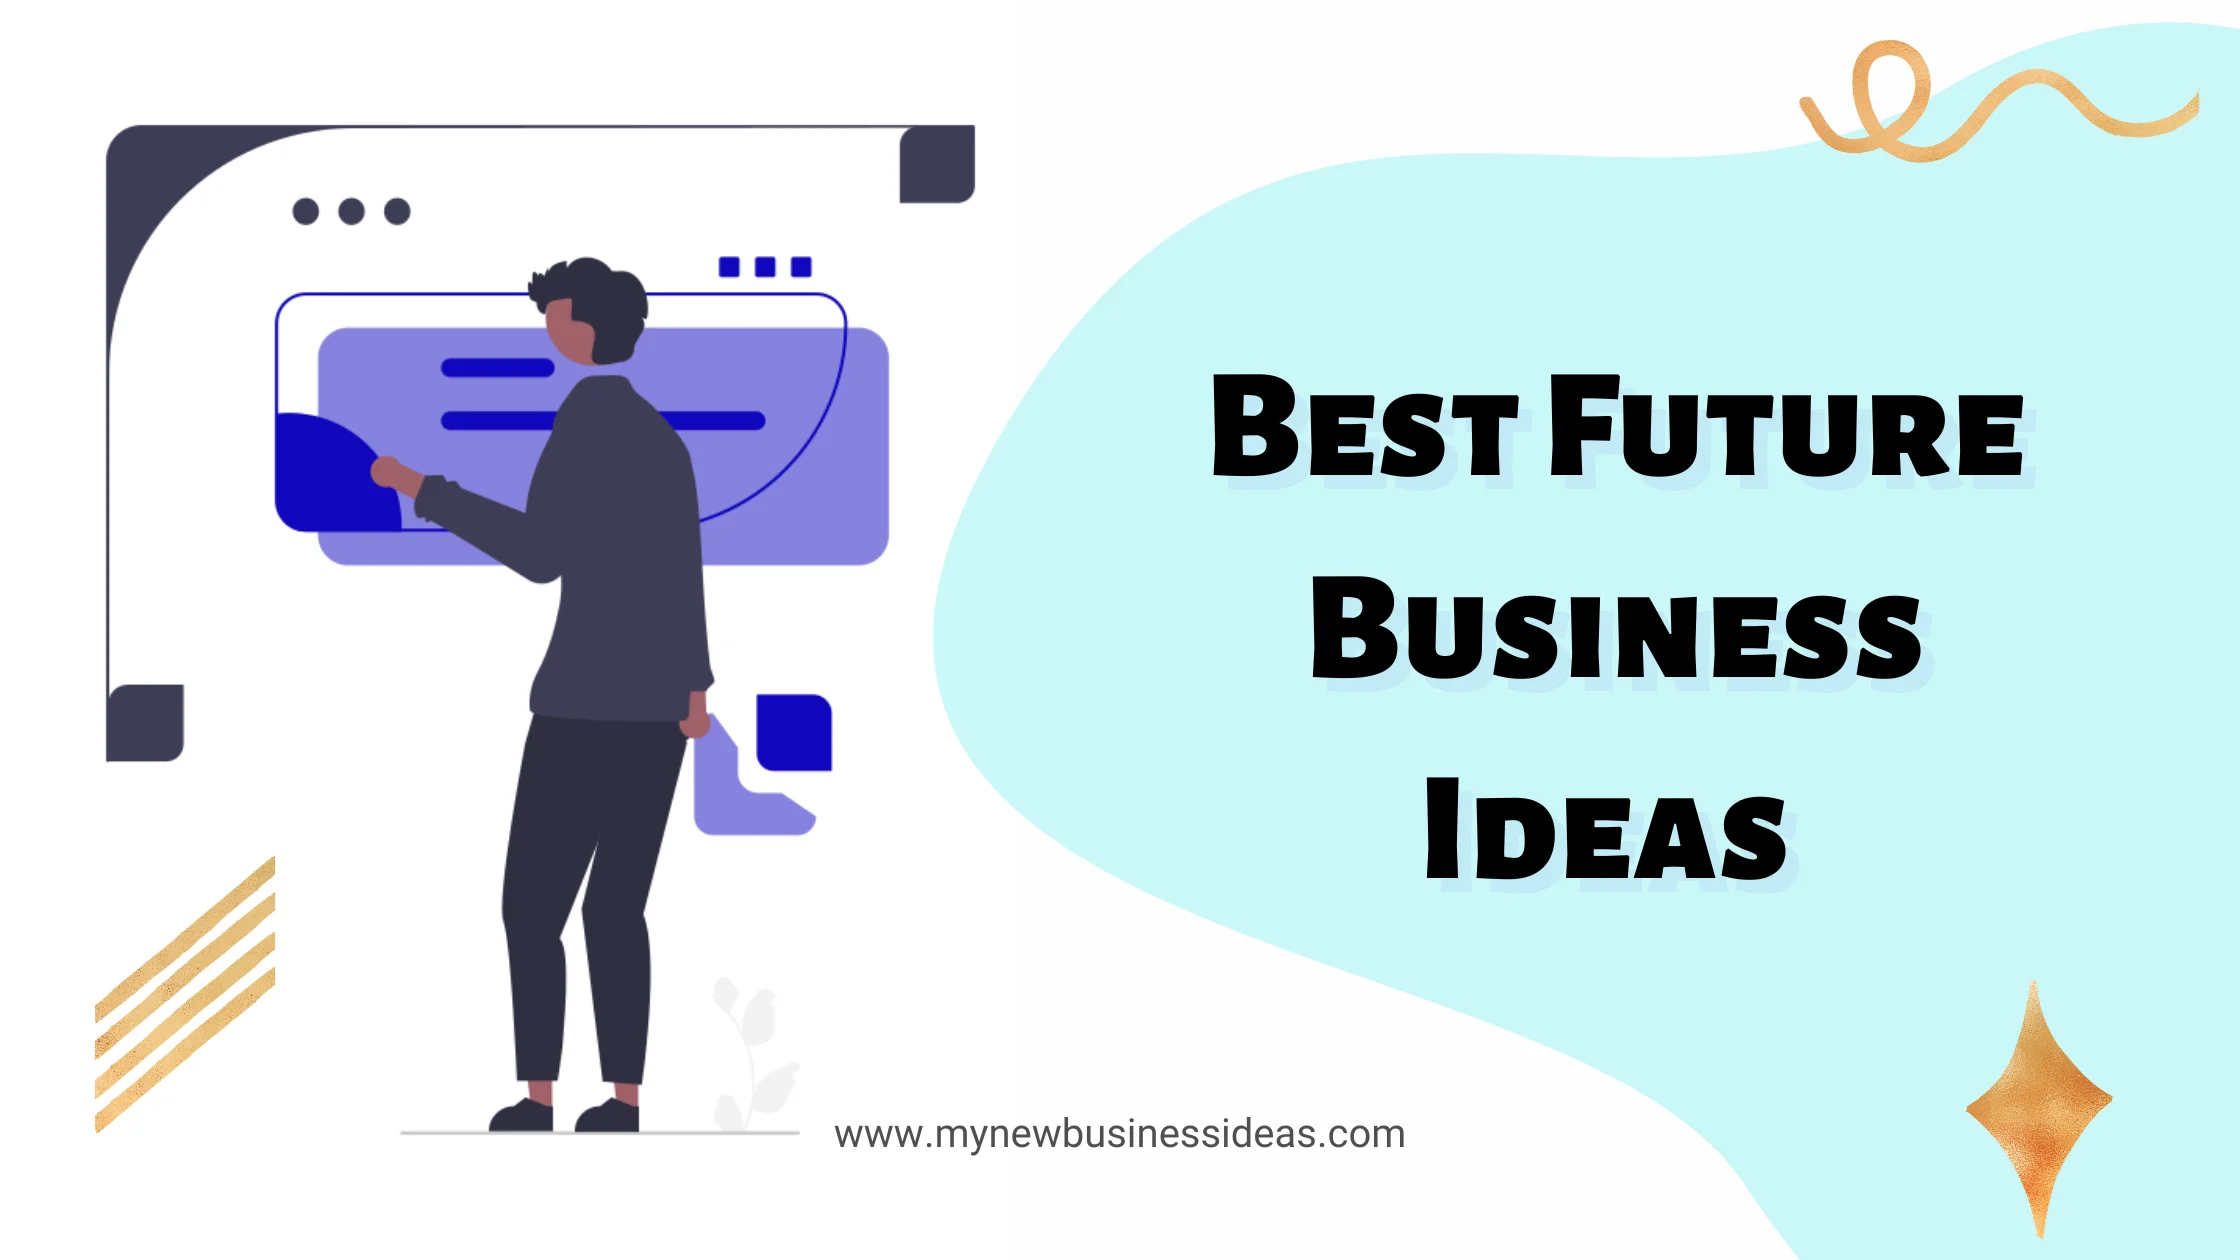 Top 10 Best Future Business Ideas for 2025 2030